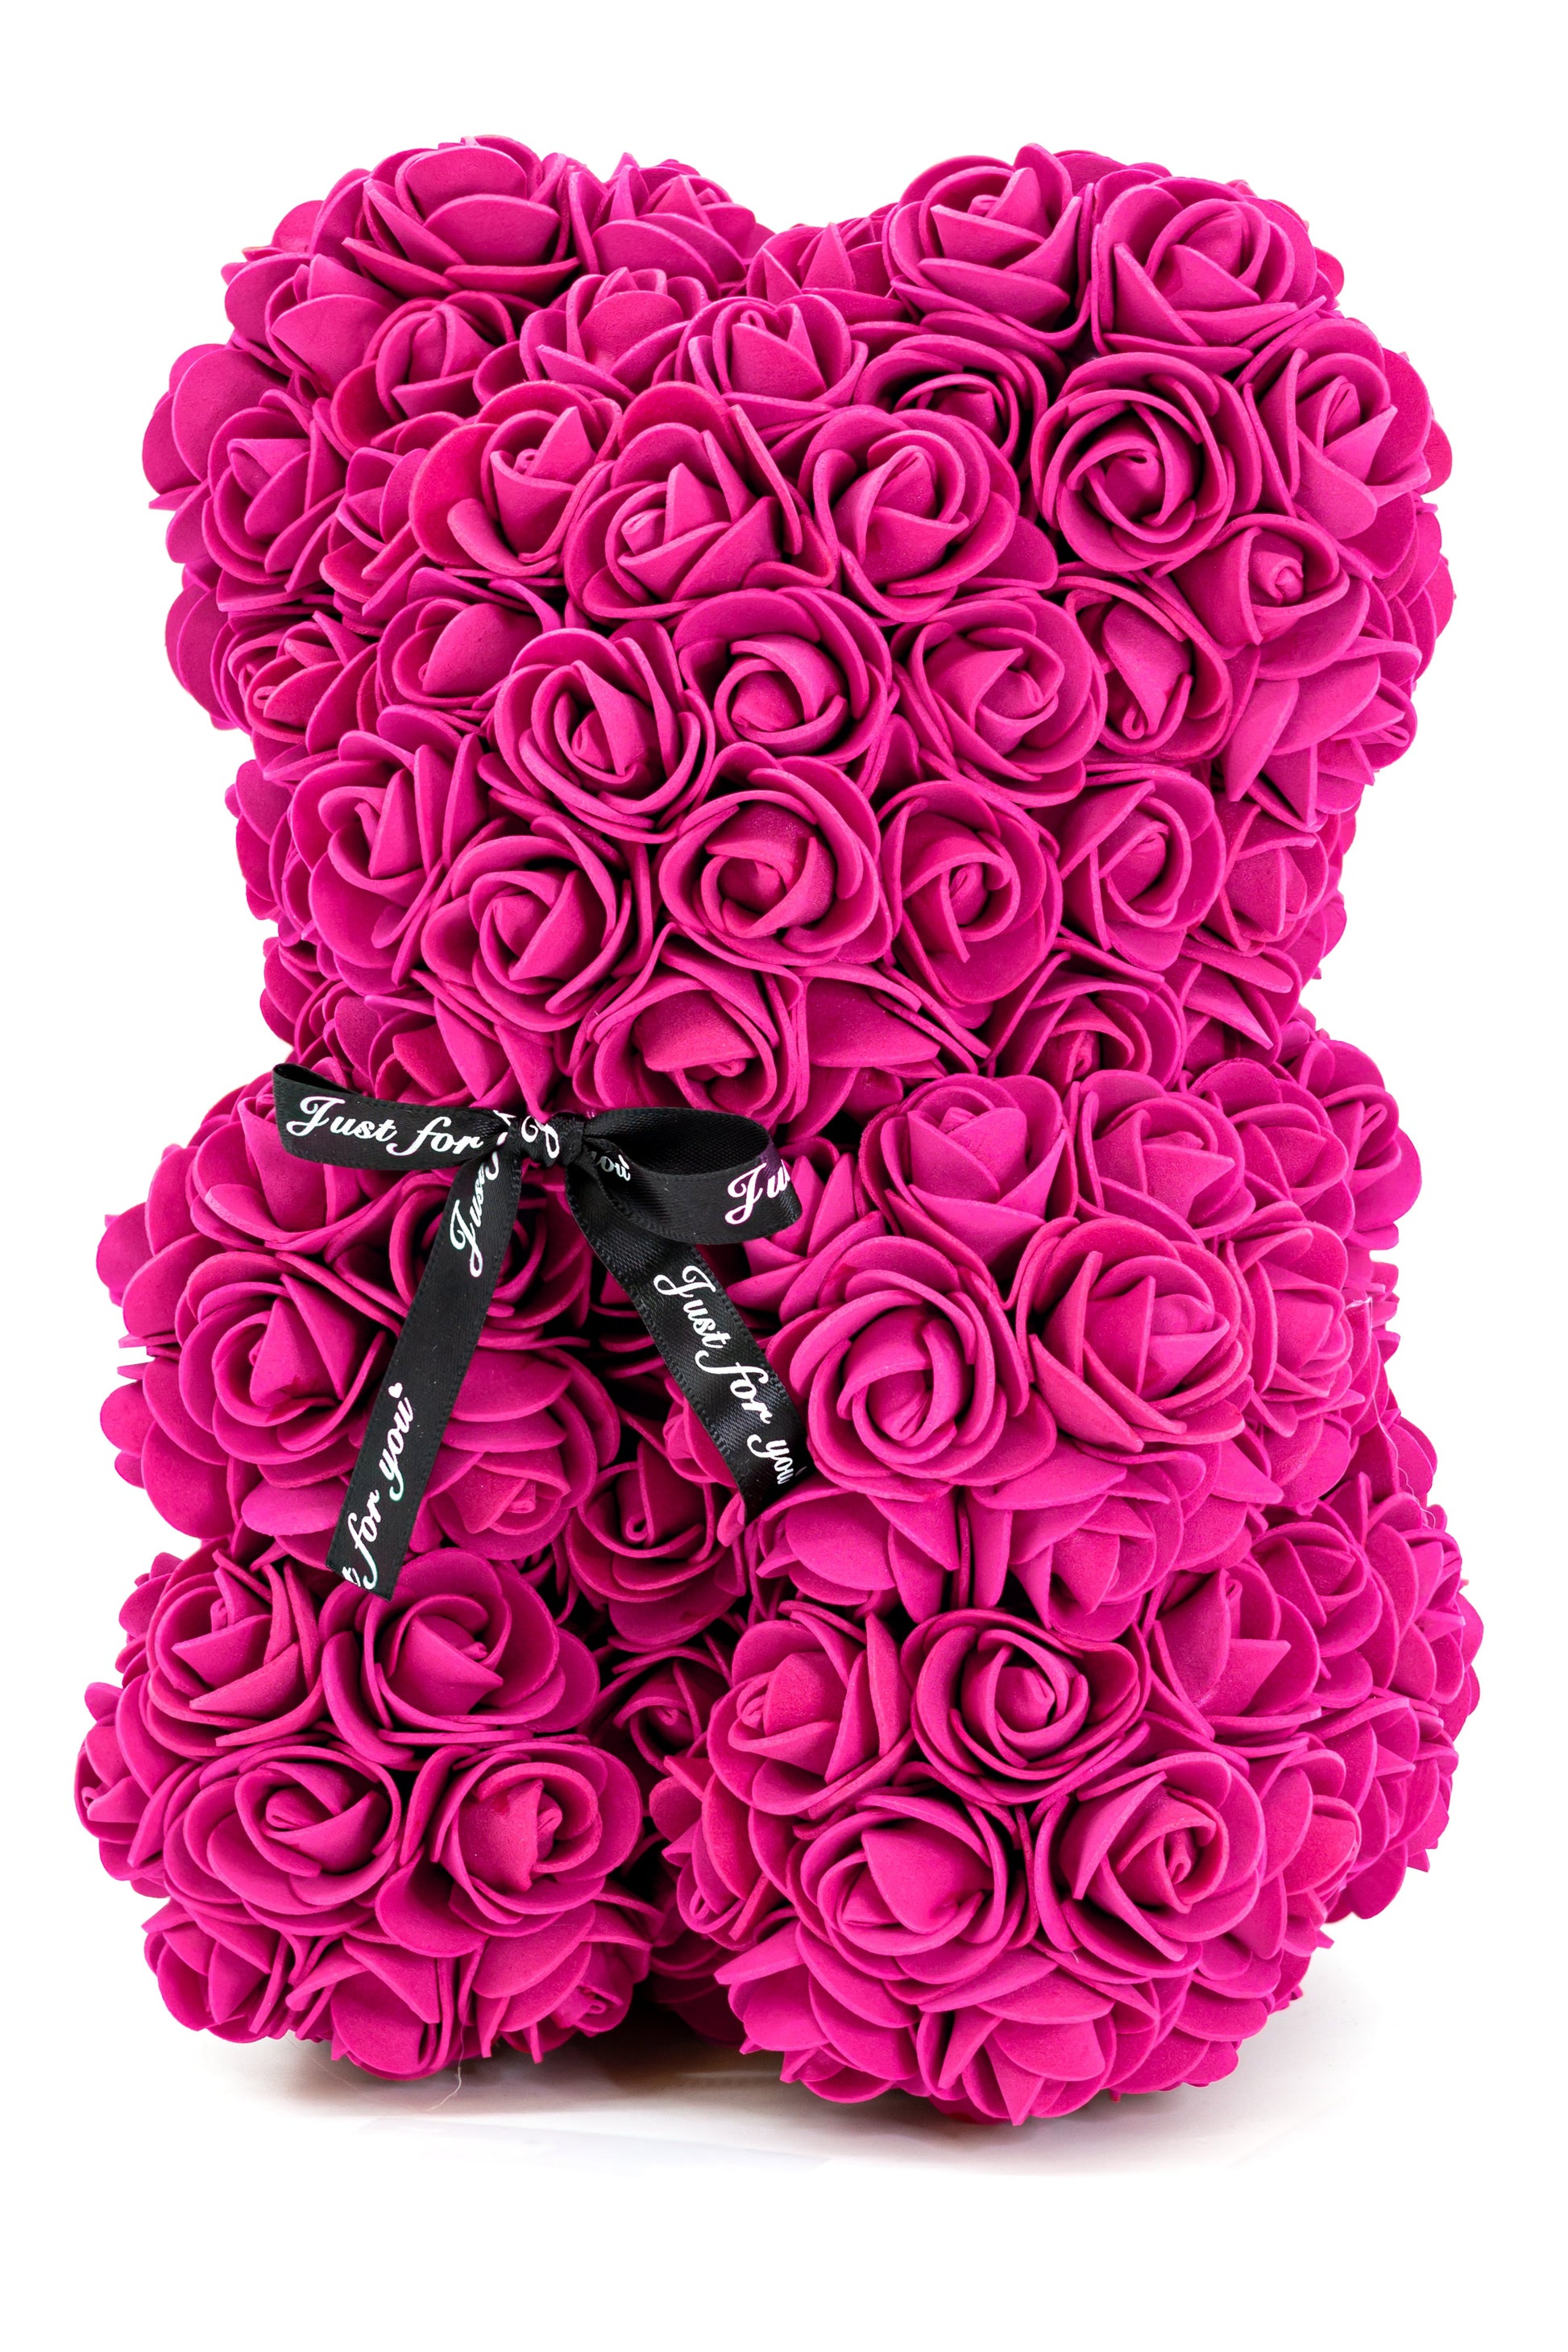 A front view of the bear shaped product covered in foam roses in the color of rose.